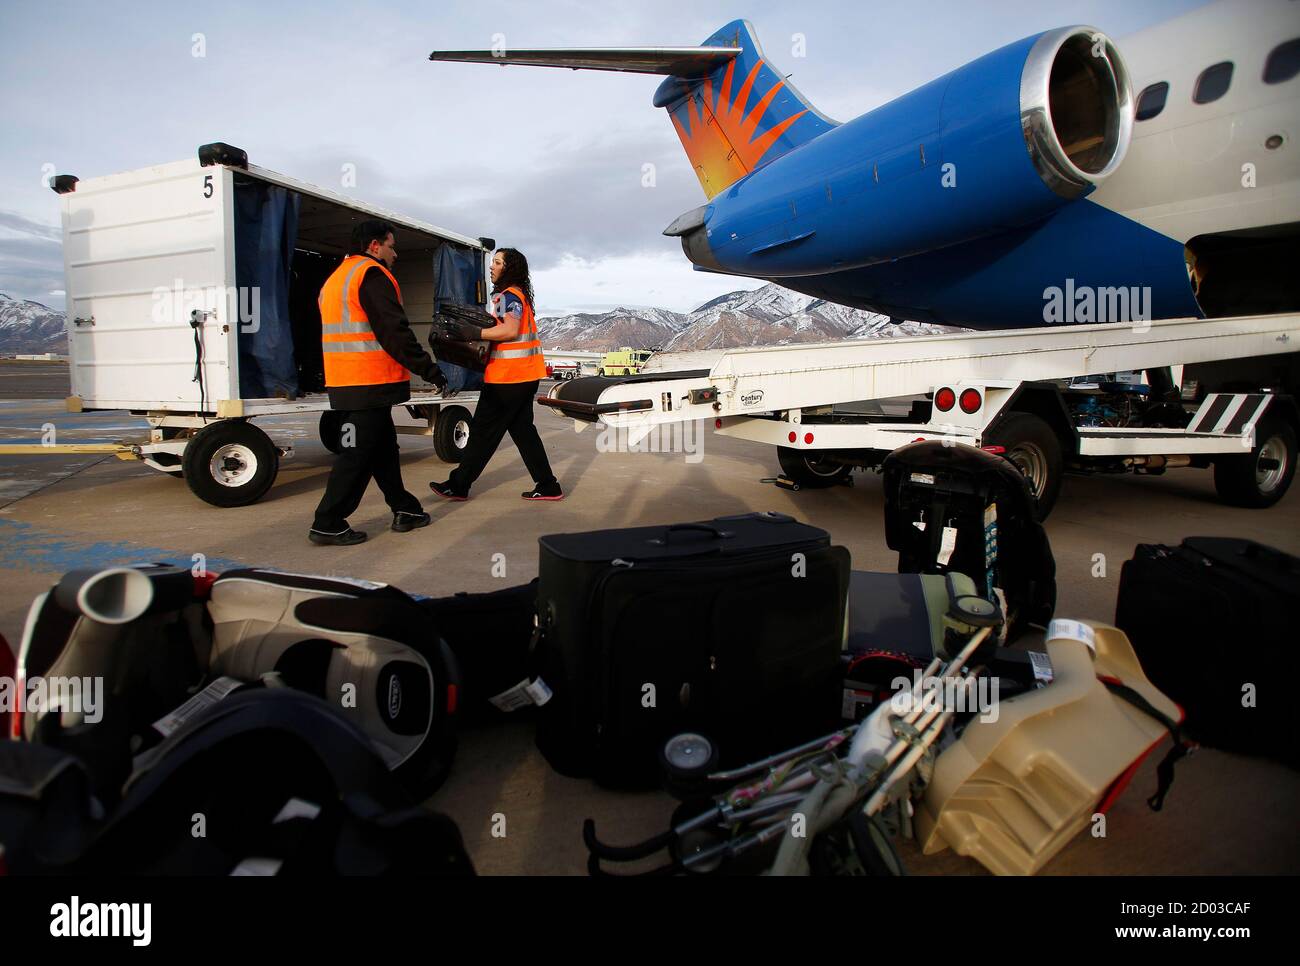 Baggage handlers unload a McDonnell Douglas MD-80 series passenger jet belonging to Allegiant Air at the Ogden-Hinckley Airport in Ogden, Utah, March 11, 2013. Picture taken March 11, 2013. REUTERS/Jim Urquhart (UNITED STATES - Tags: TRANSPORT BUSINESS) Stock Photo